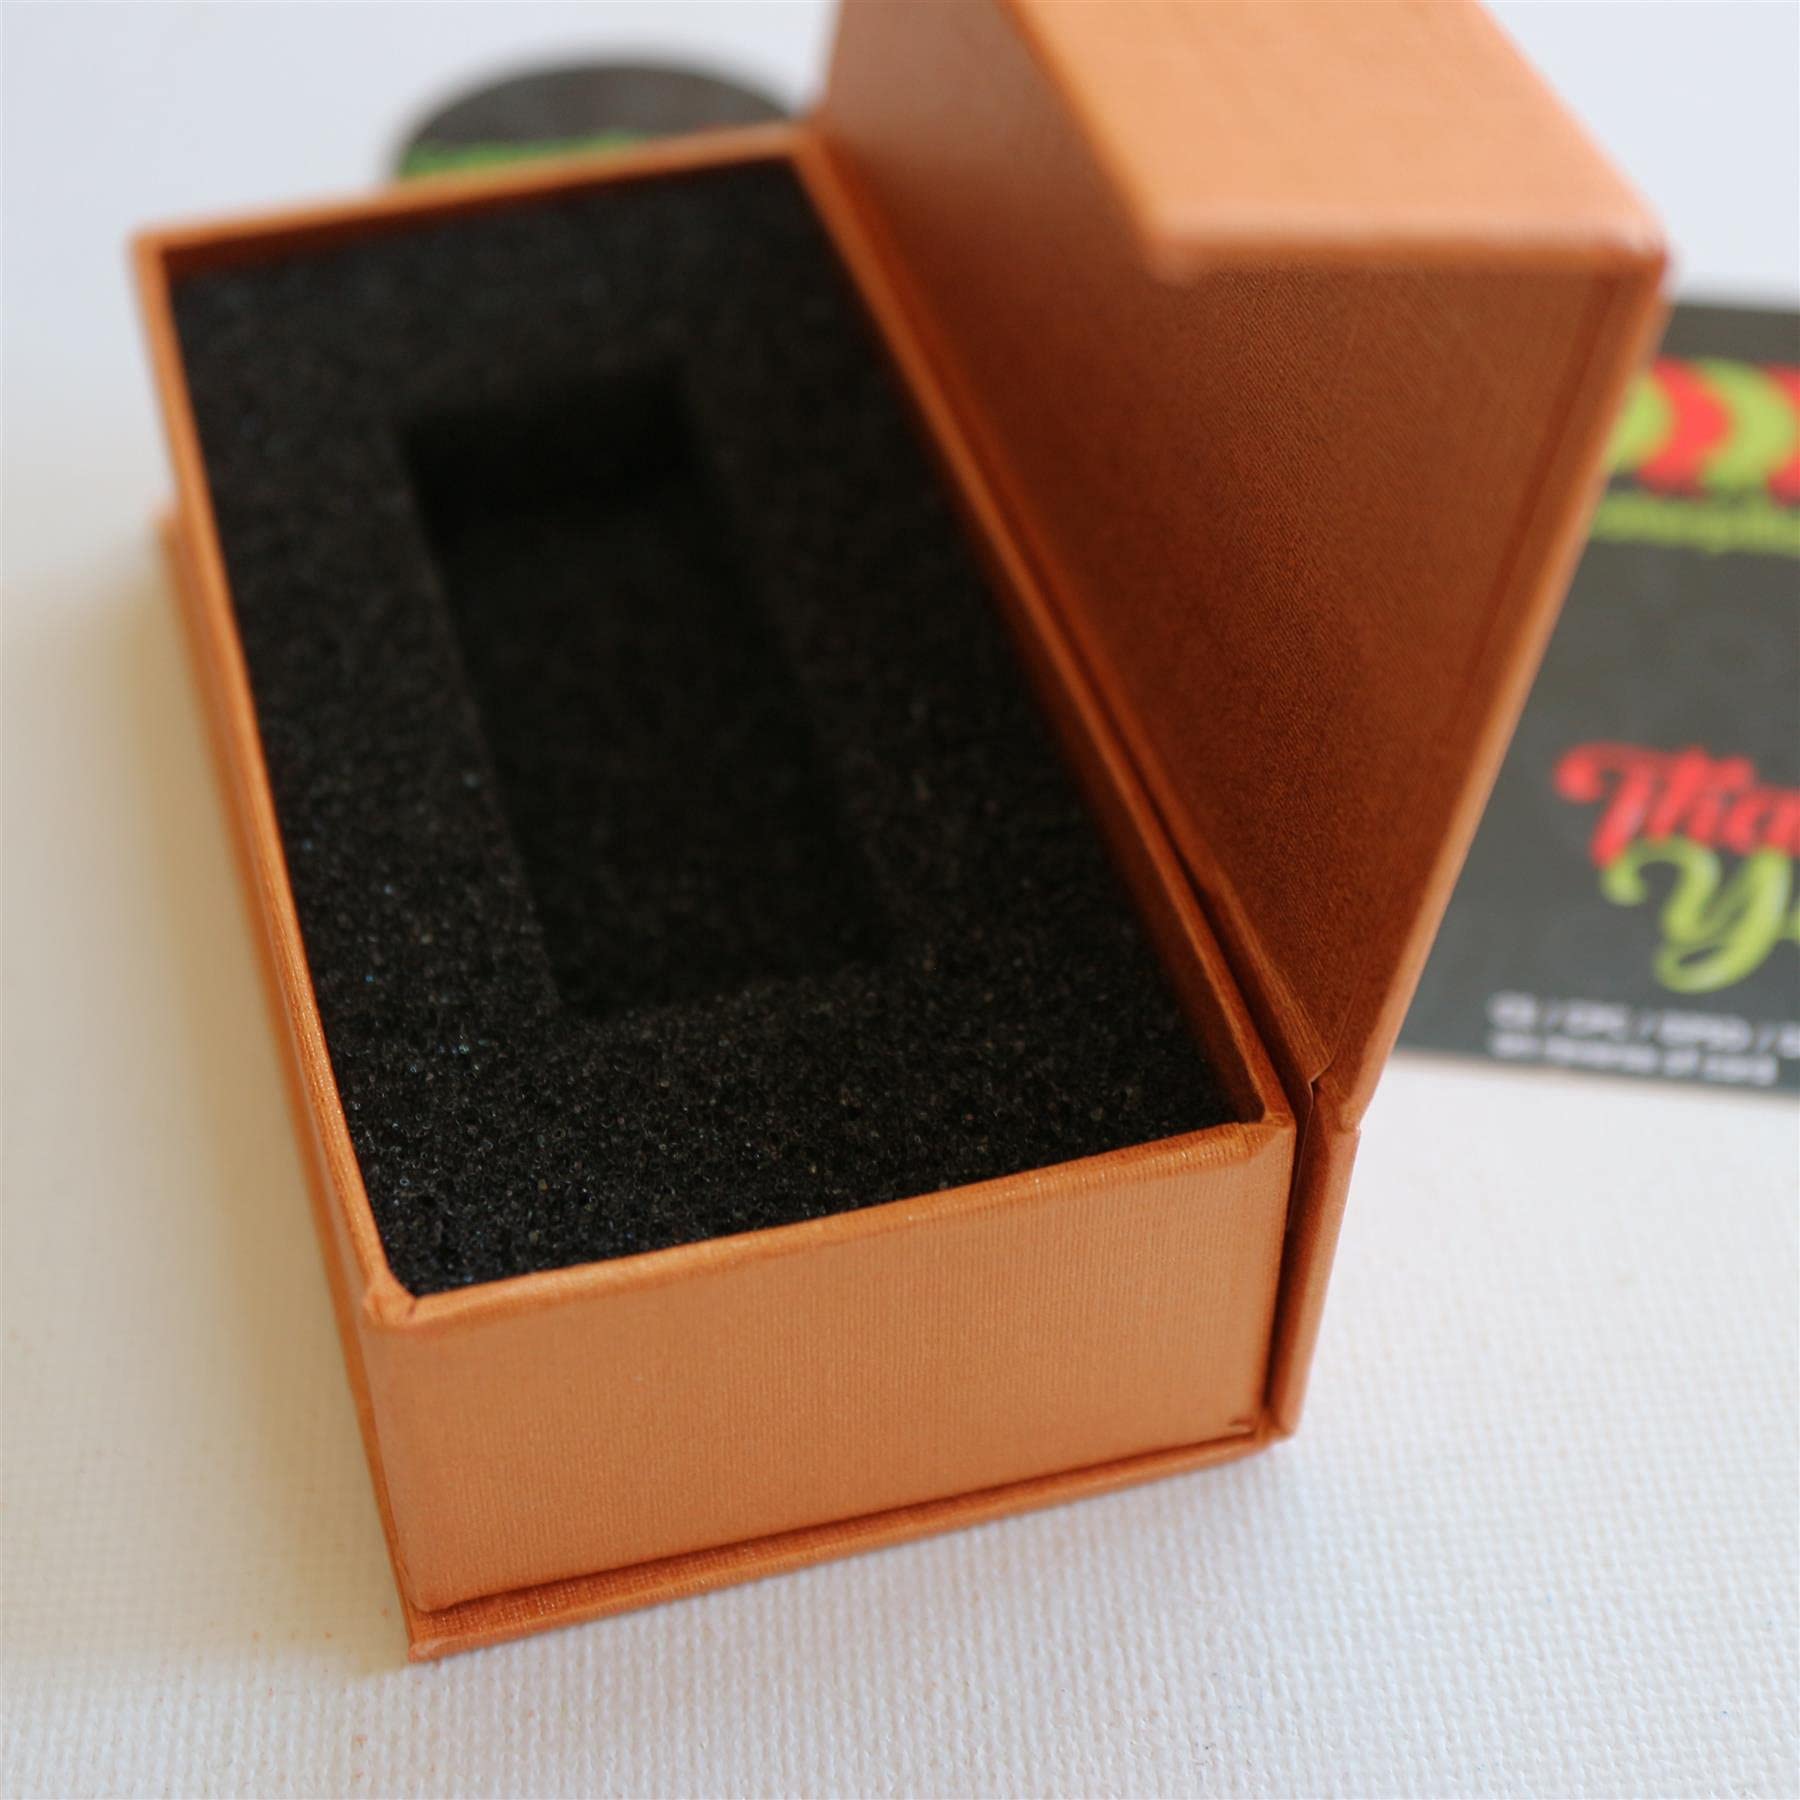 Magnetic USB Presentation Gift Boxes Cream Flash Drives Removable Drives Wedding USB Packaging Box